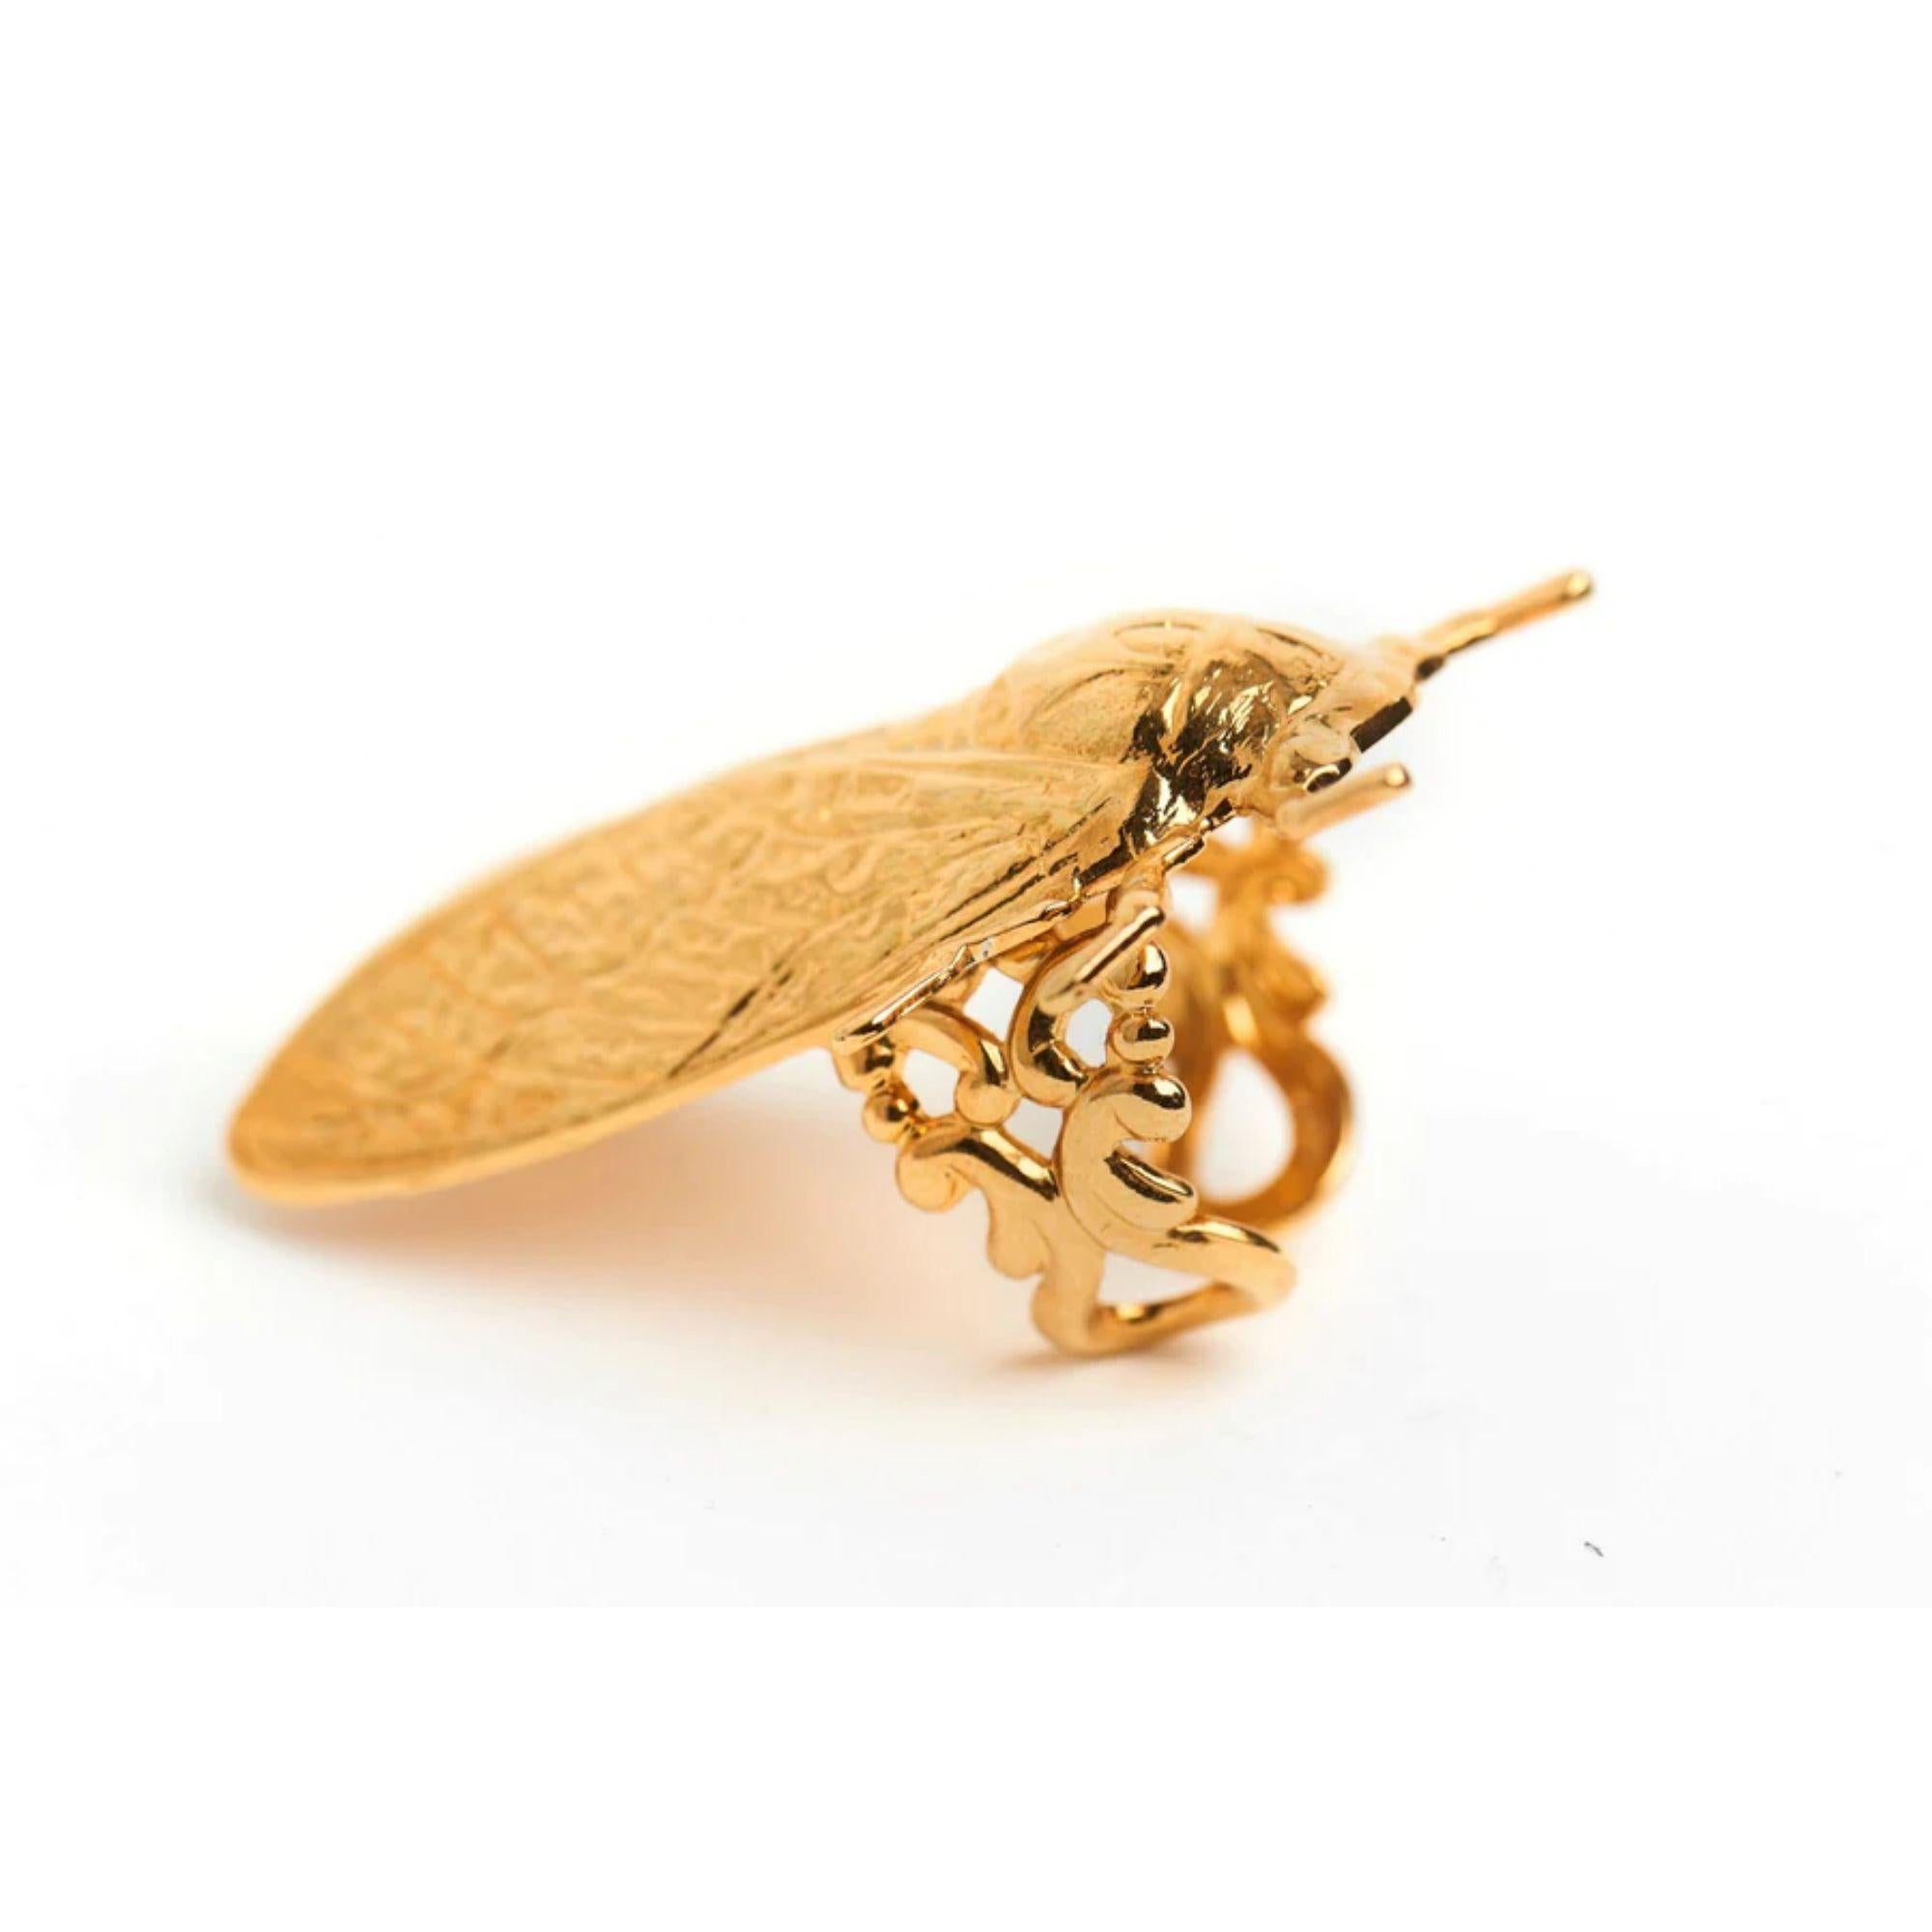 Oversized cicada ring is an integral part of the Mordekai bug collection. Reminiscing of African moths, this piece is a luxurious royal ring Cleopatra would wear. Can be worn both ways and is a strong statement for a cocktail ring. Make sure you